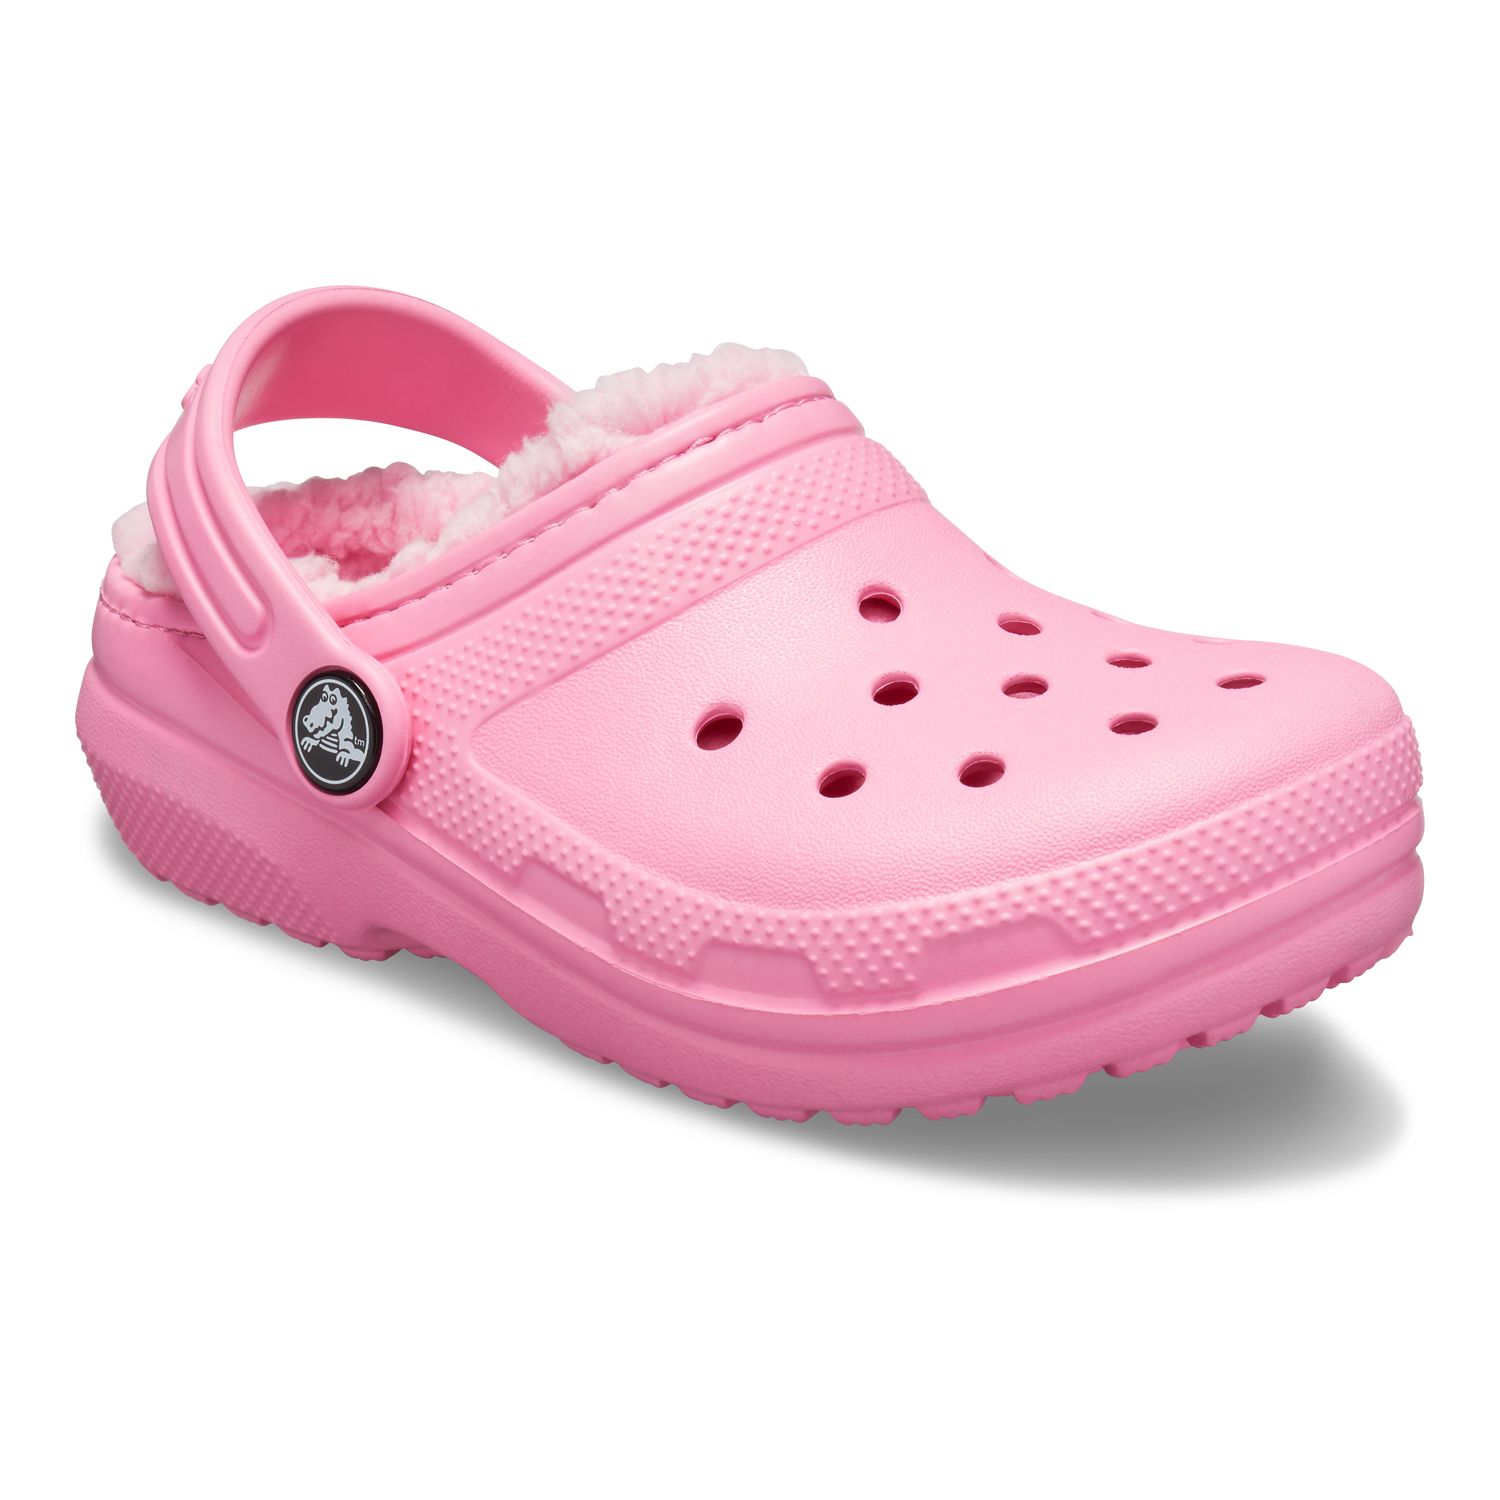 place to buy crocs near me